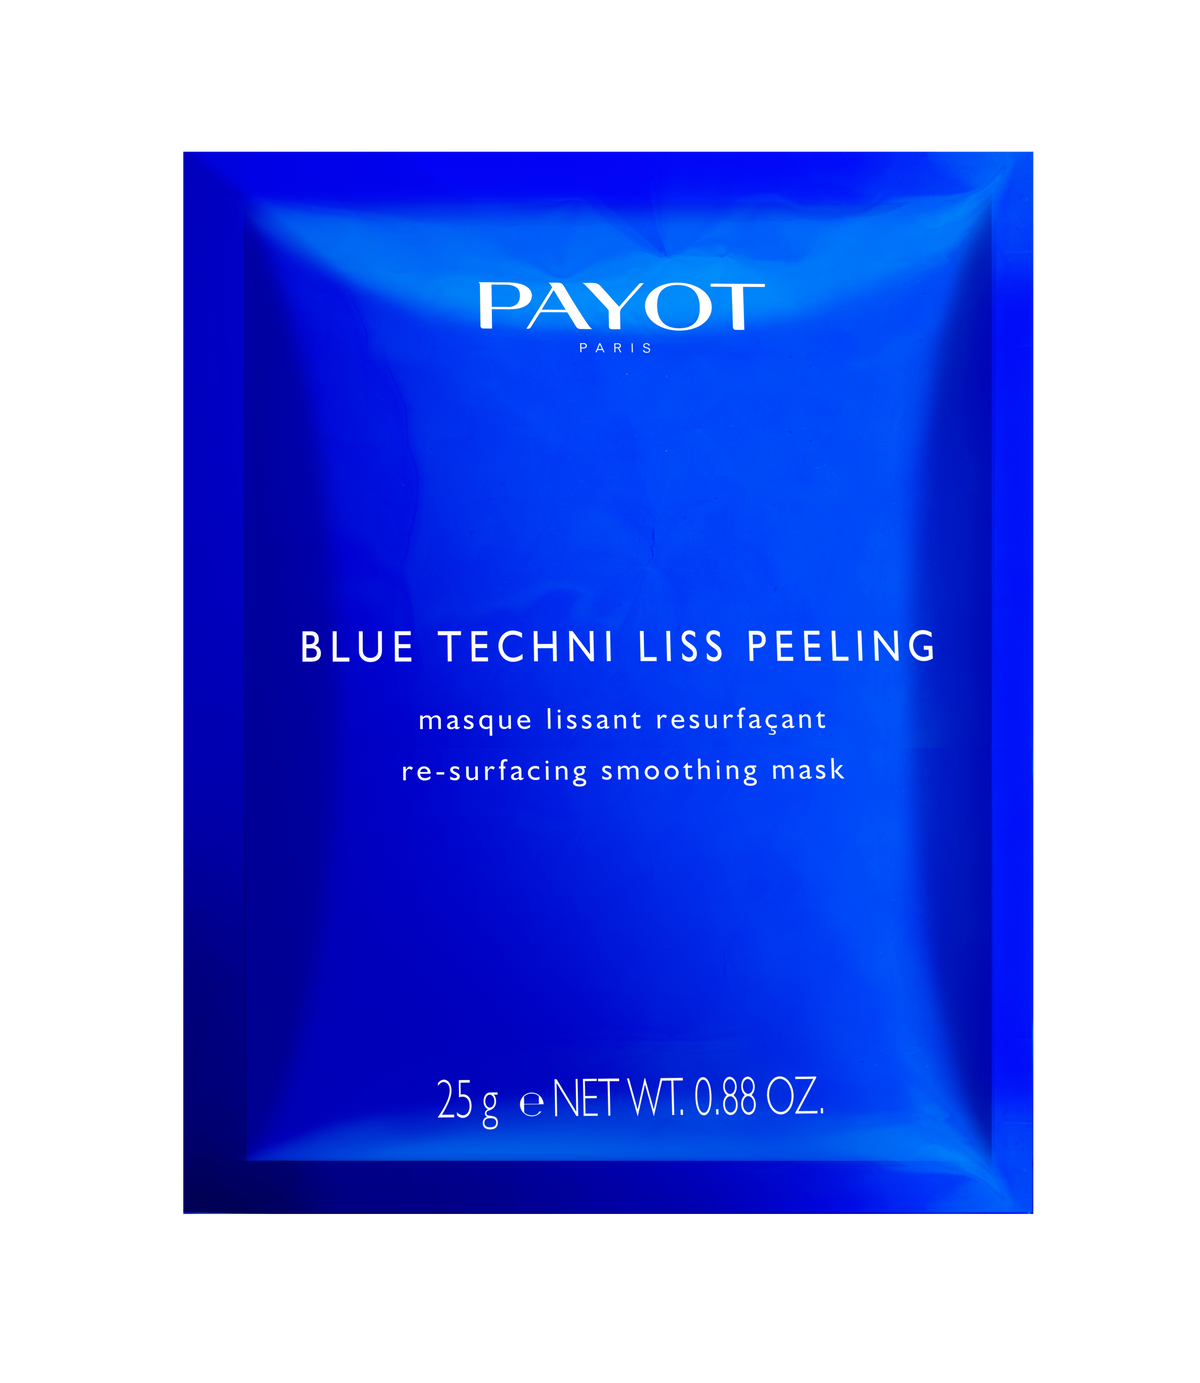 Payot Blue Techni Liss Weekend Sheet Mask